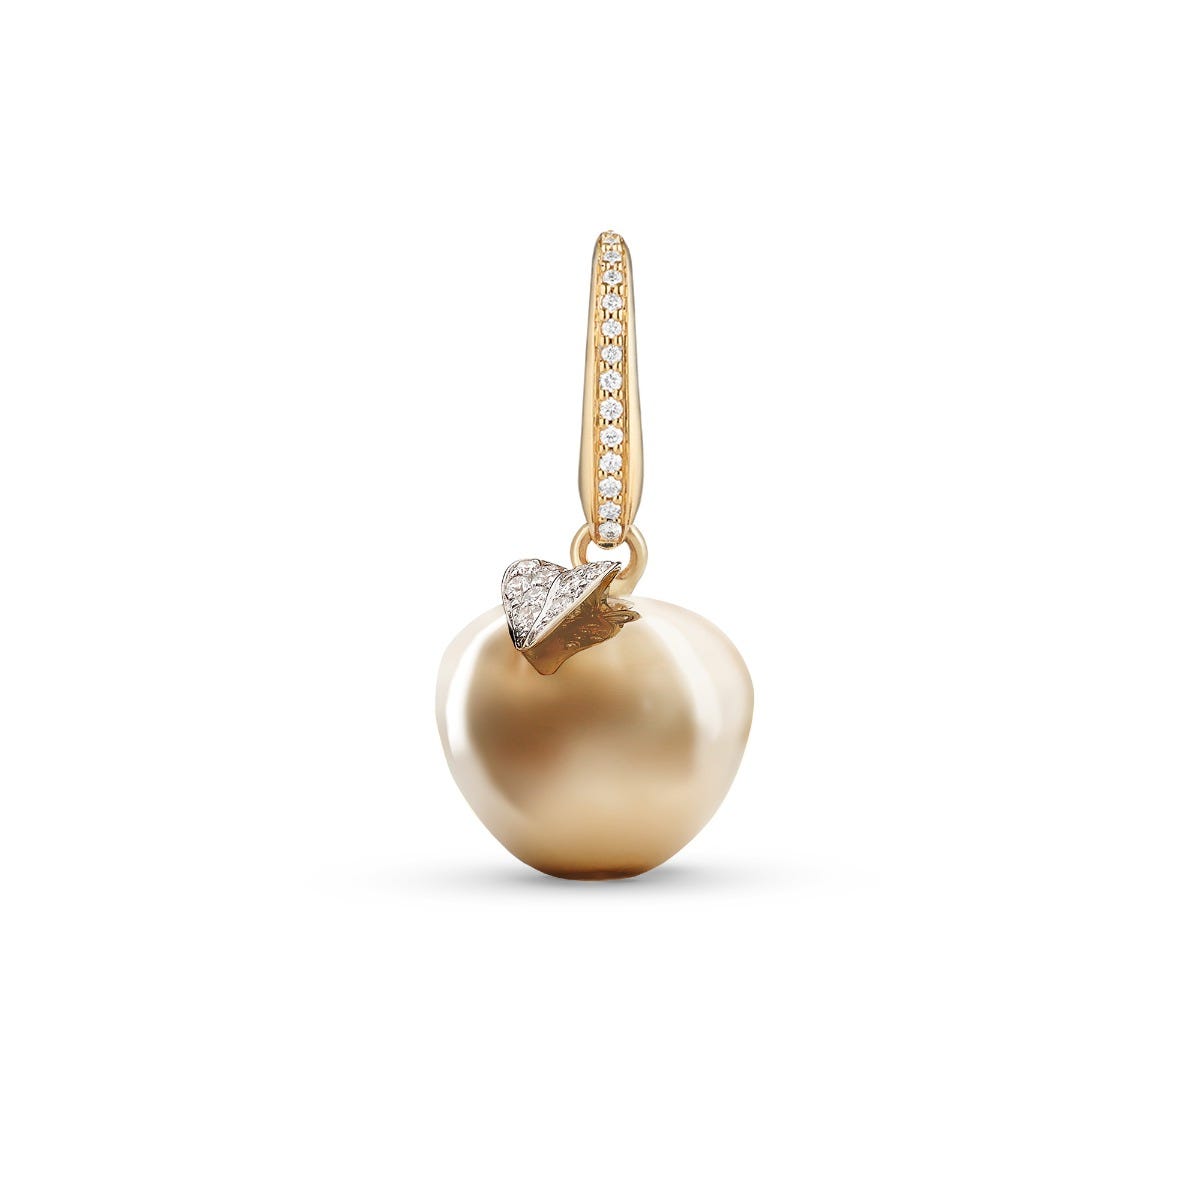 Woodland Apple Charm in 18ct Yellow Gold with Diamonds